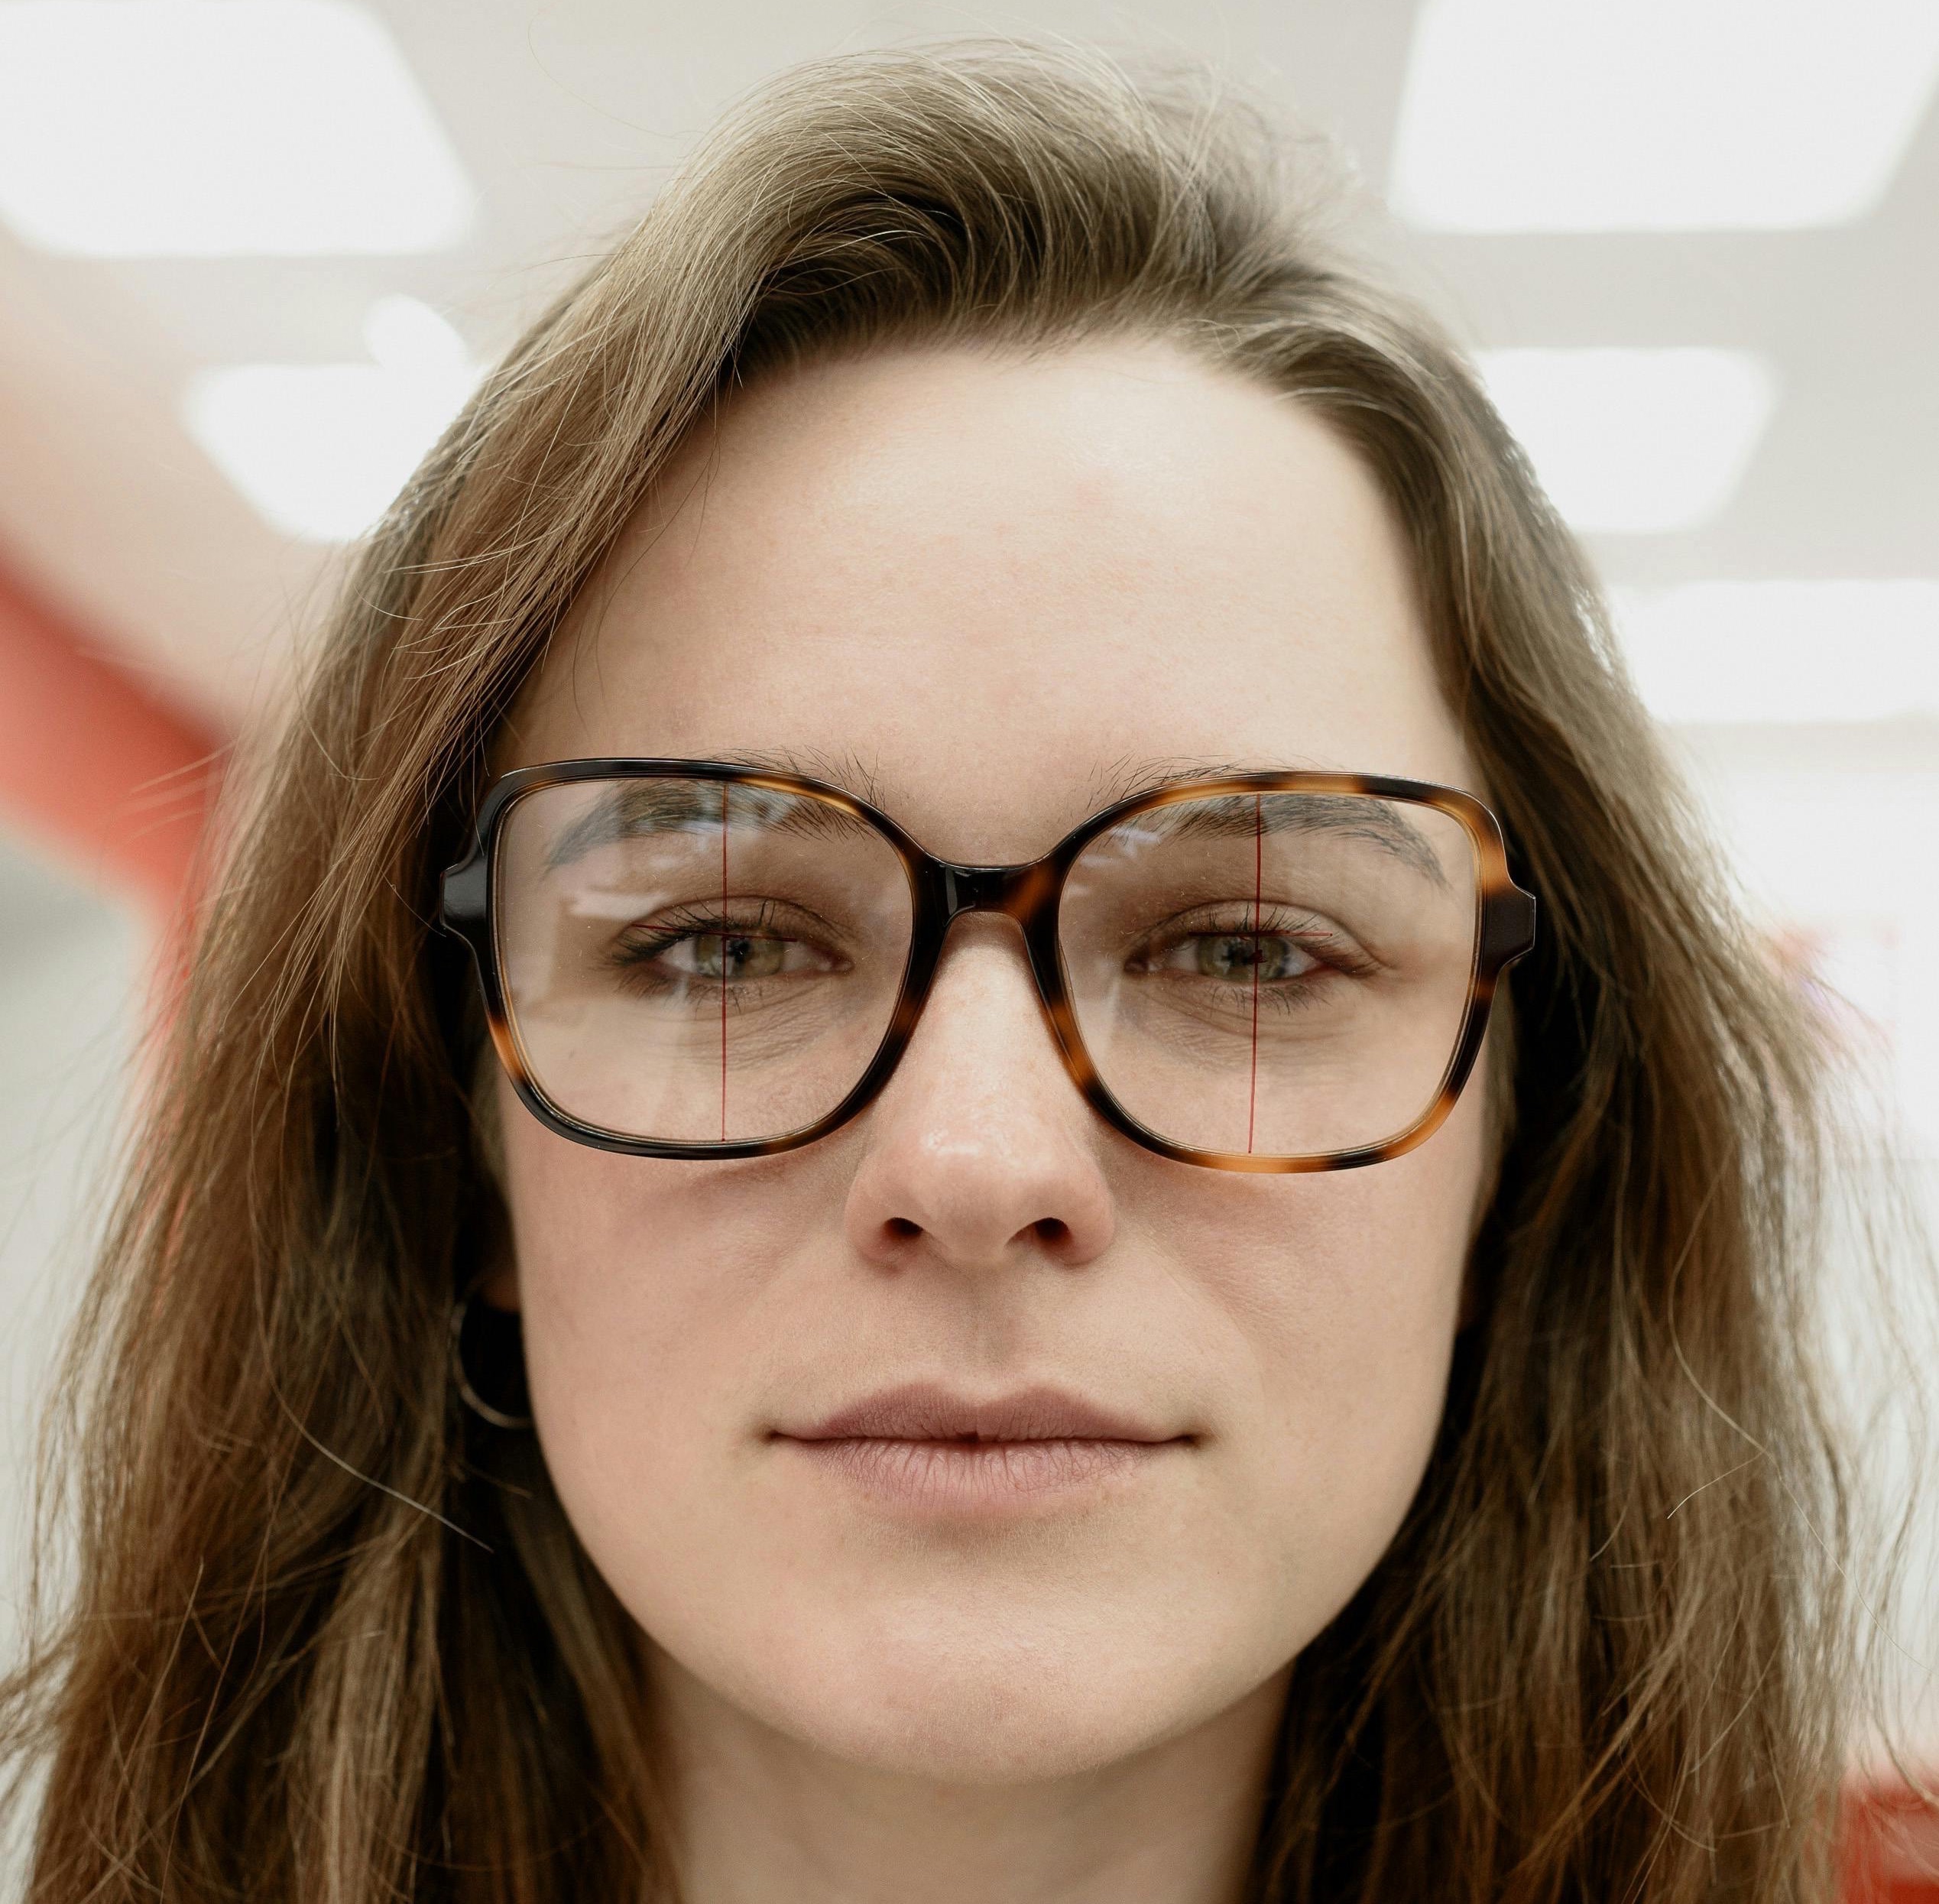 Woman wearing glasses with PD markings